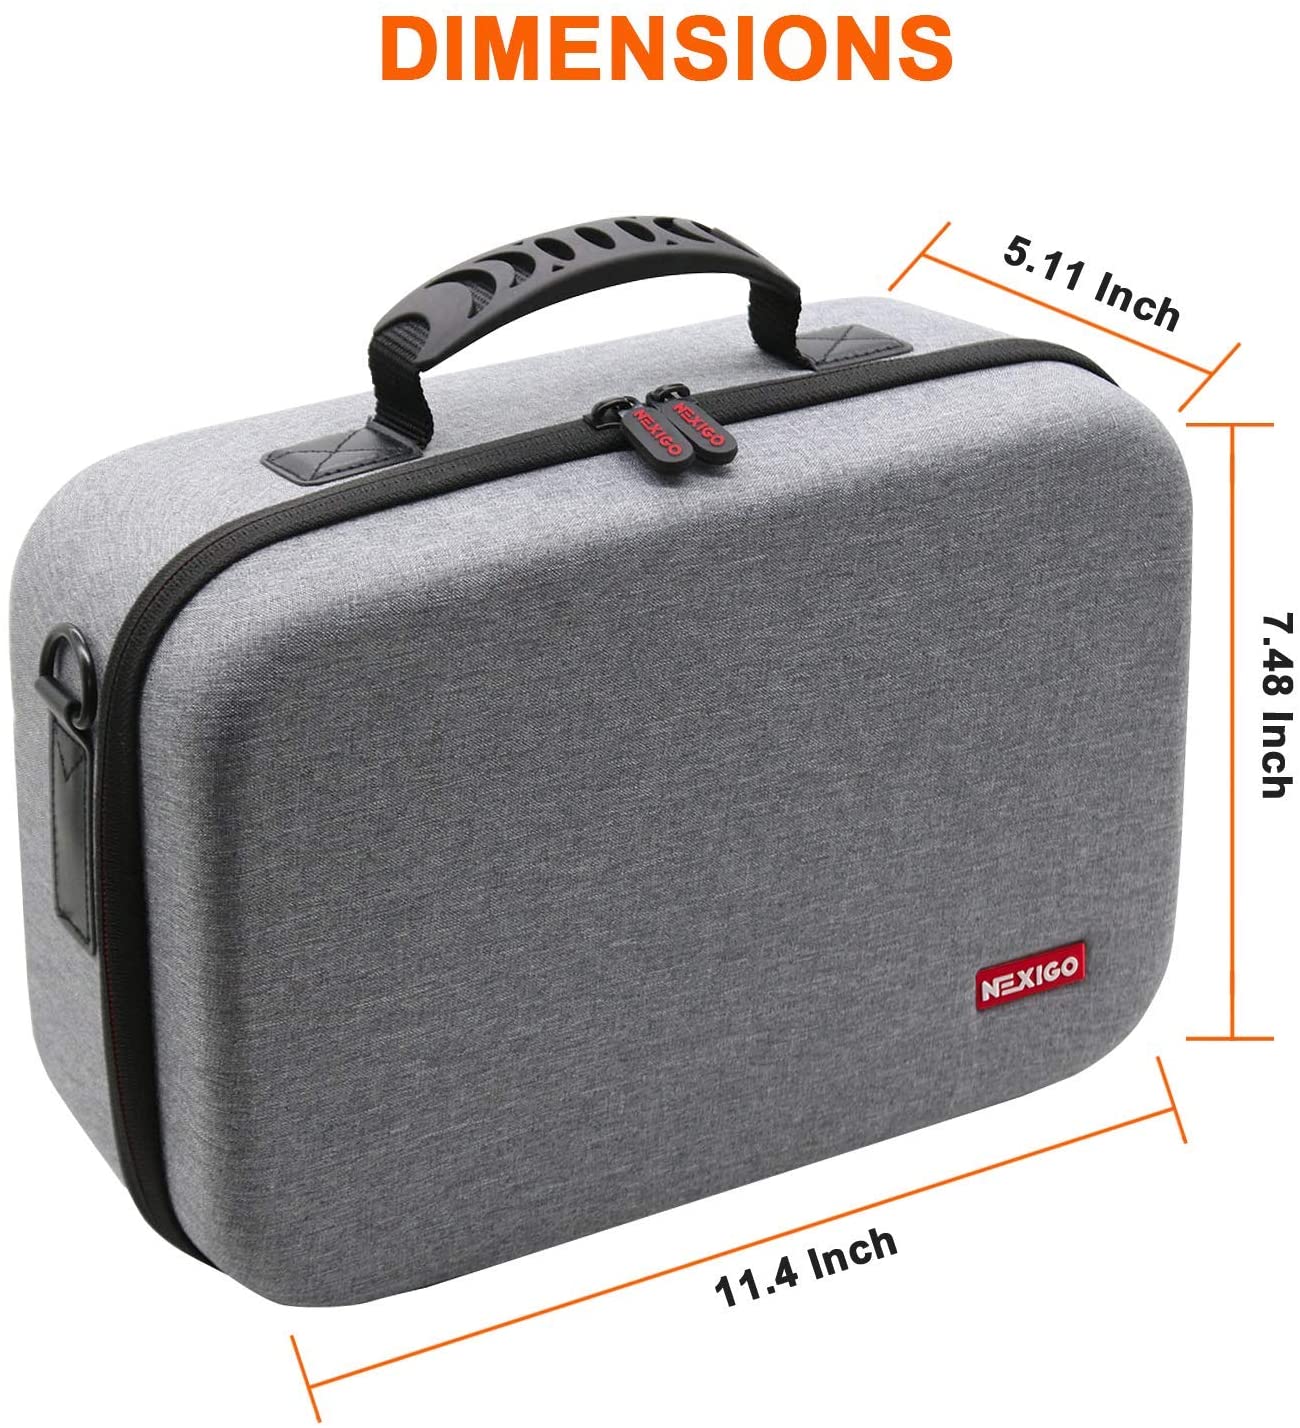 EVA Storage Carrying Case for Oculus Go VR Wireless Headset